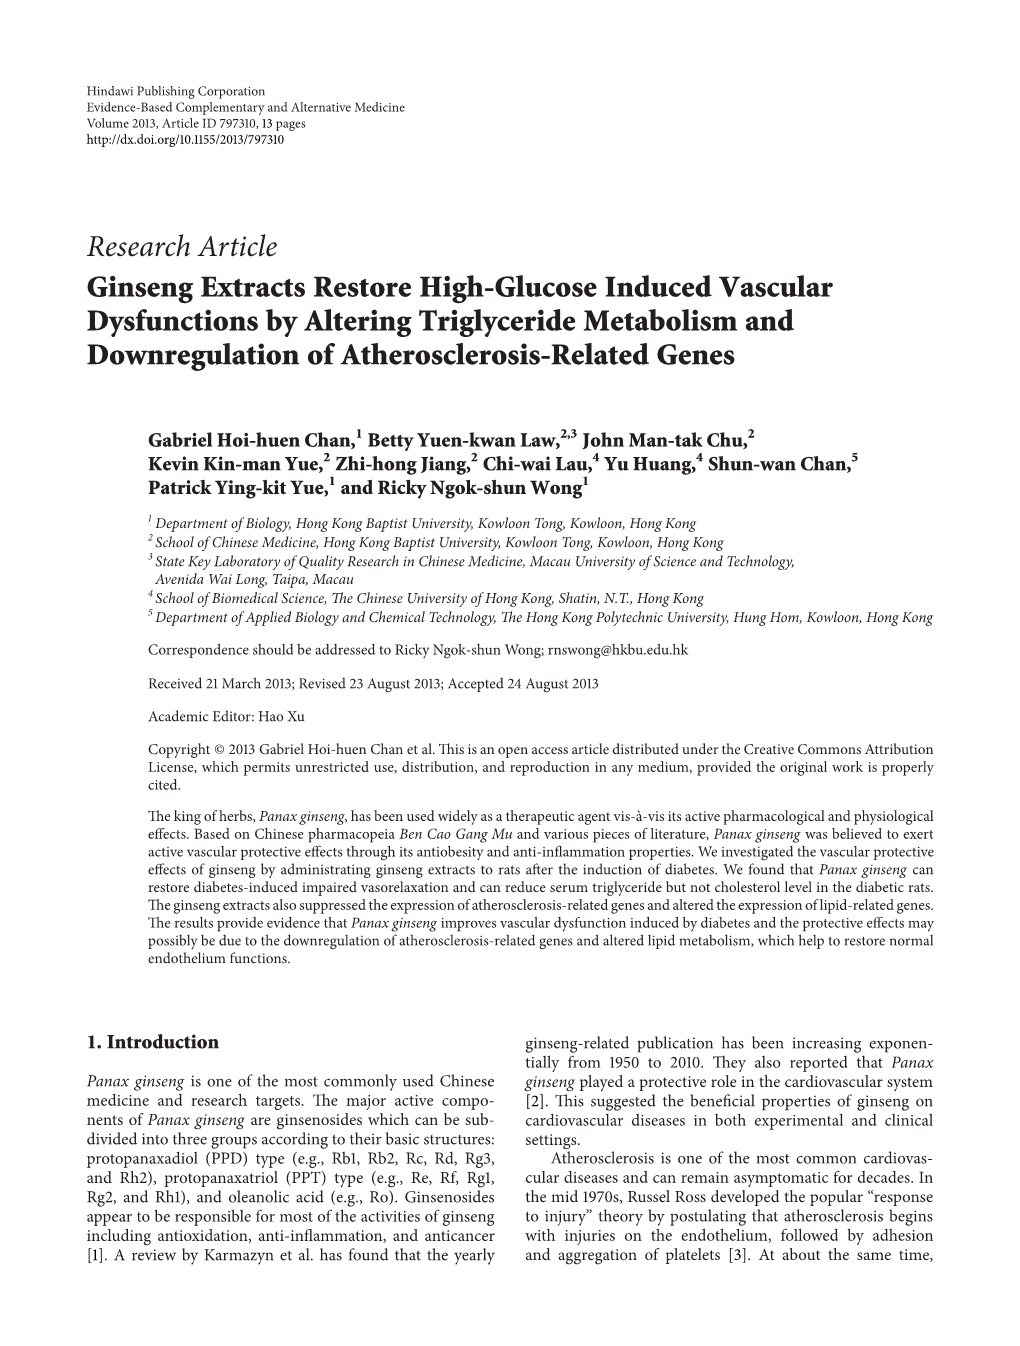 Ginseng Extracts Restore High-Glucose Induced Vascular Dysfunctions by Altering Triglyceride Metabolism and Downregulation of Atherosclerosis-Related Genes